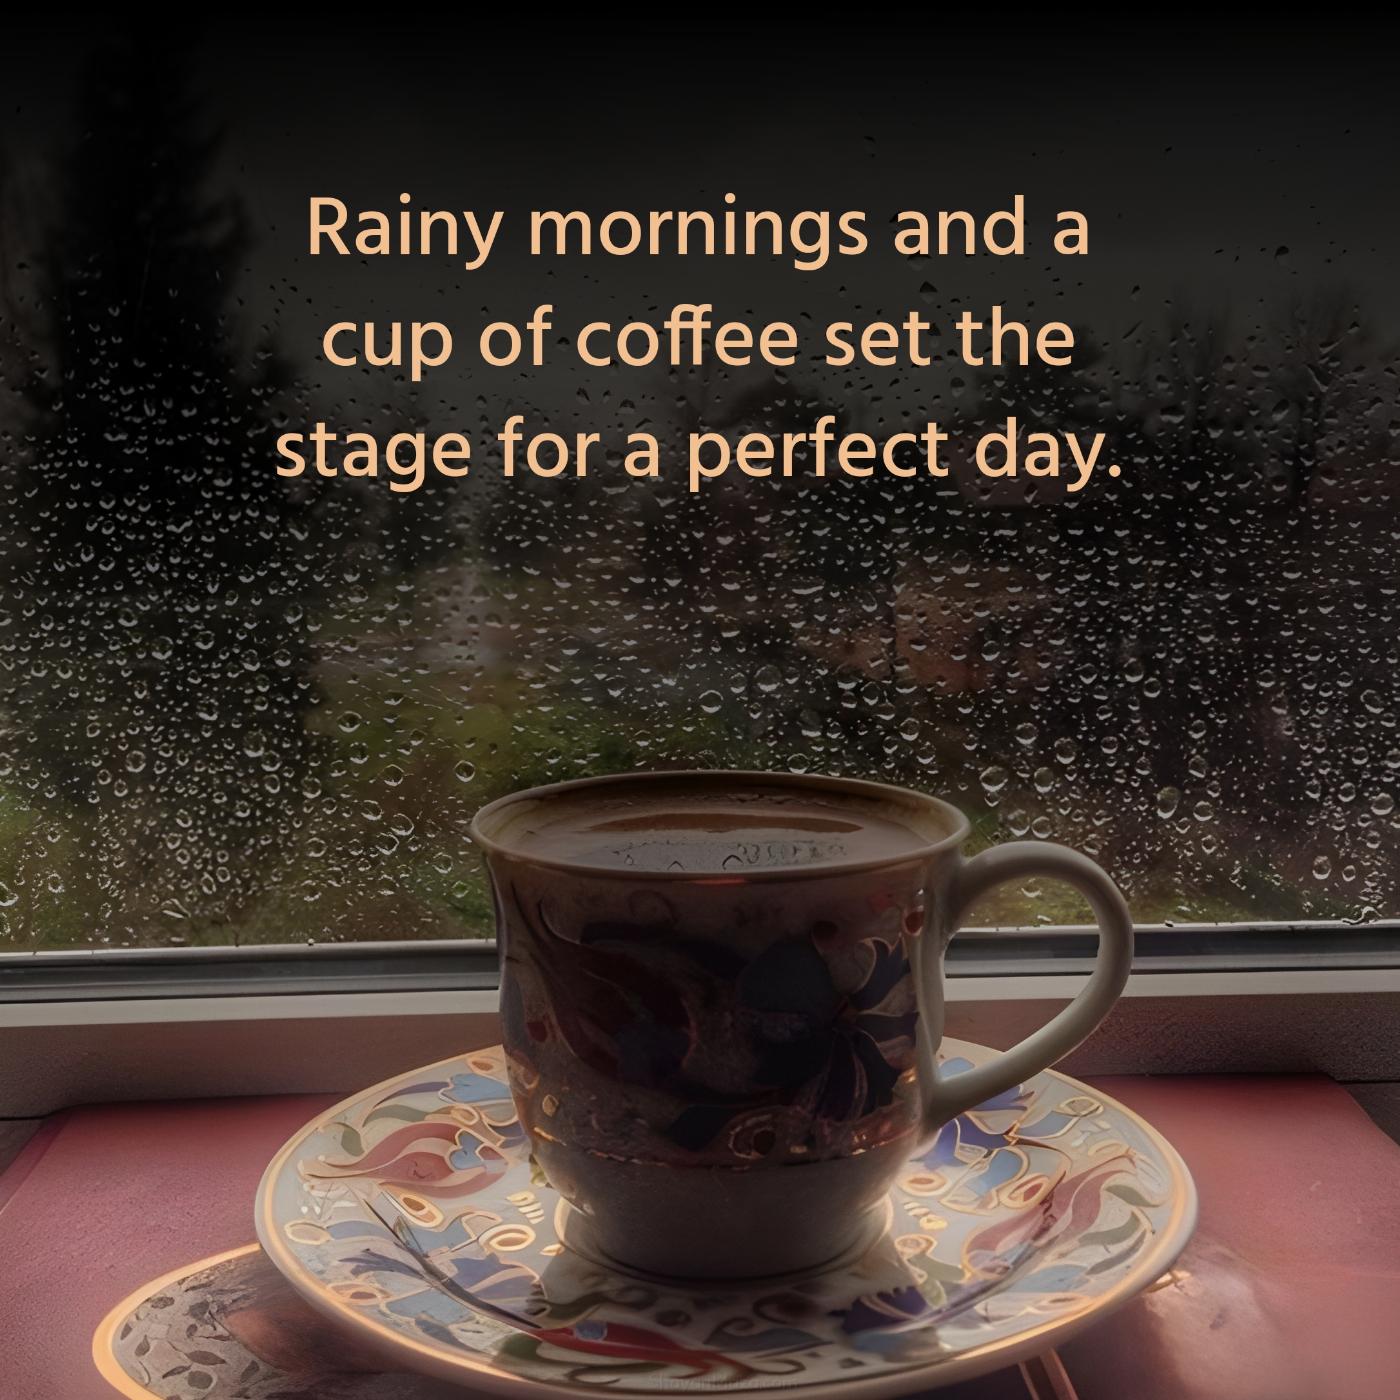 Rainy mornings and a cup of coffee set the stage for a perfect day